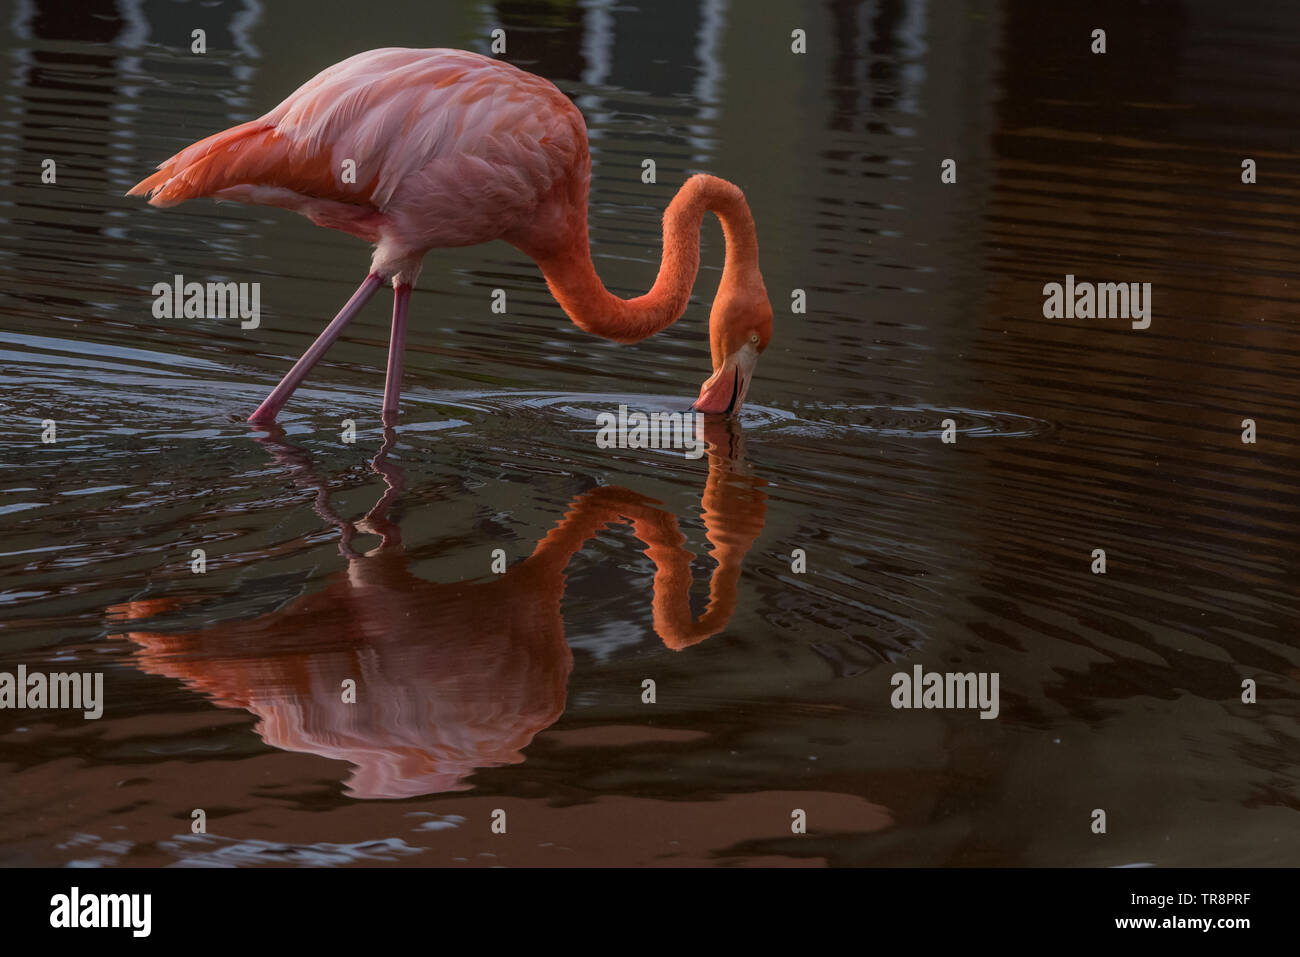 A wild american flamingo, Phoenicopterus ruber glyphorhynchus, from Isabela island in Ecuador. The birds in the Galapagos are considered a subspecies. Stock Photo